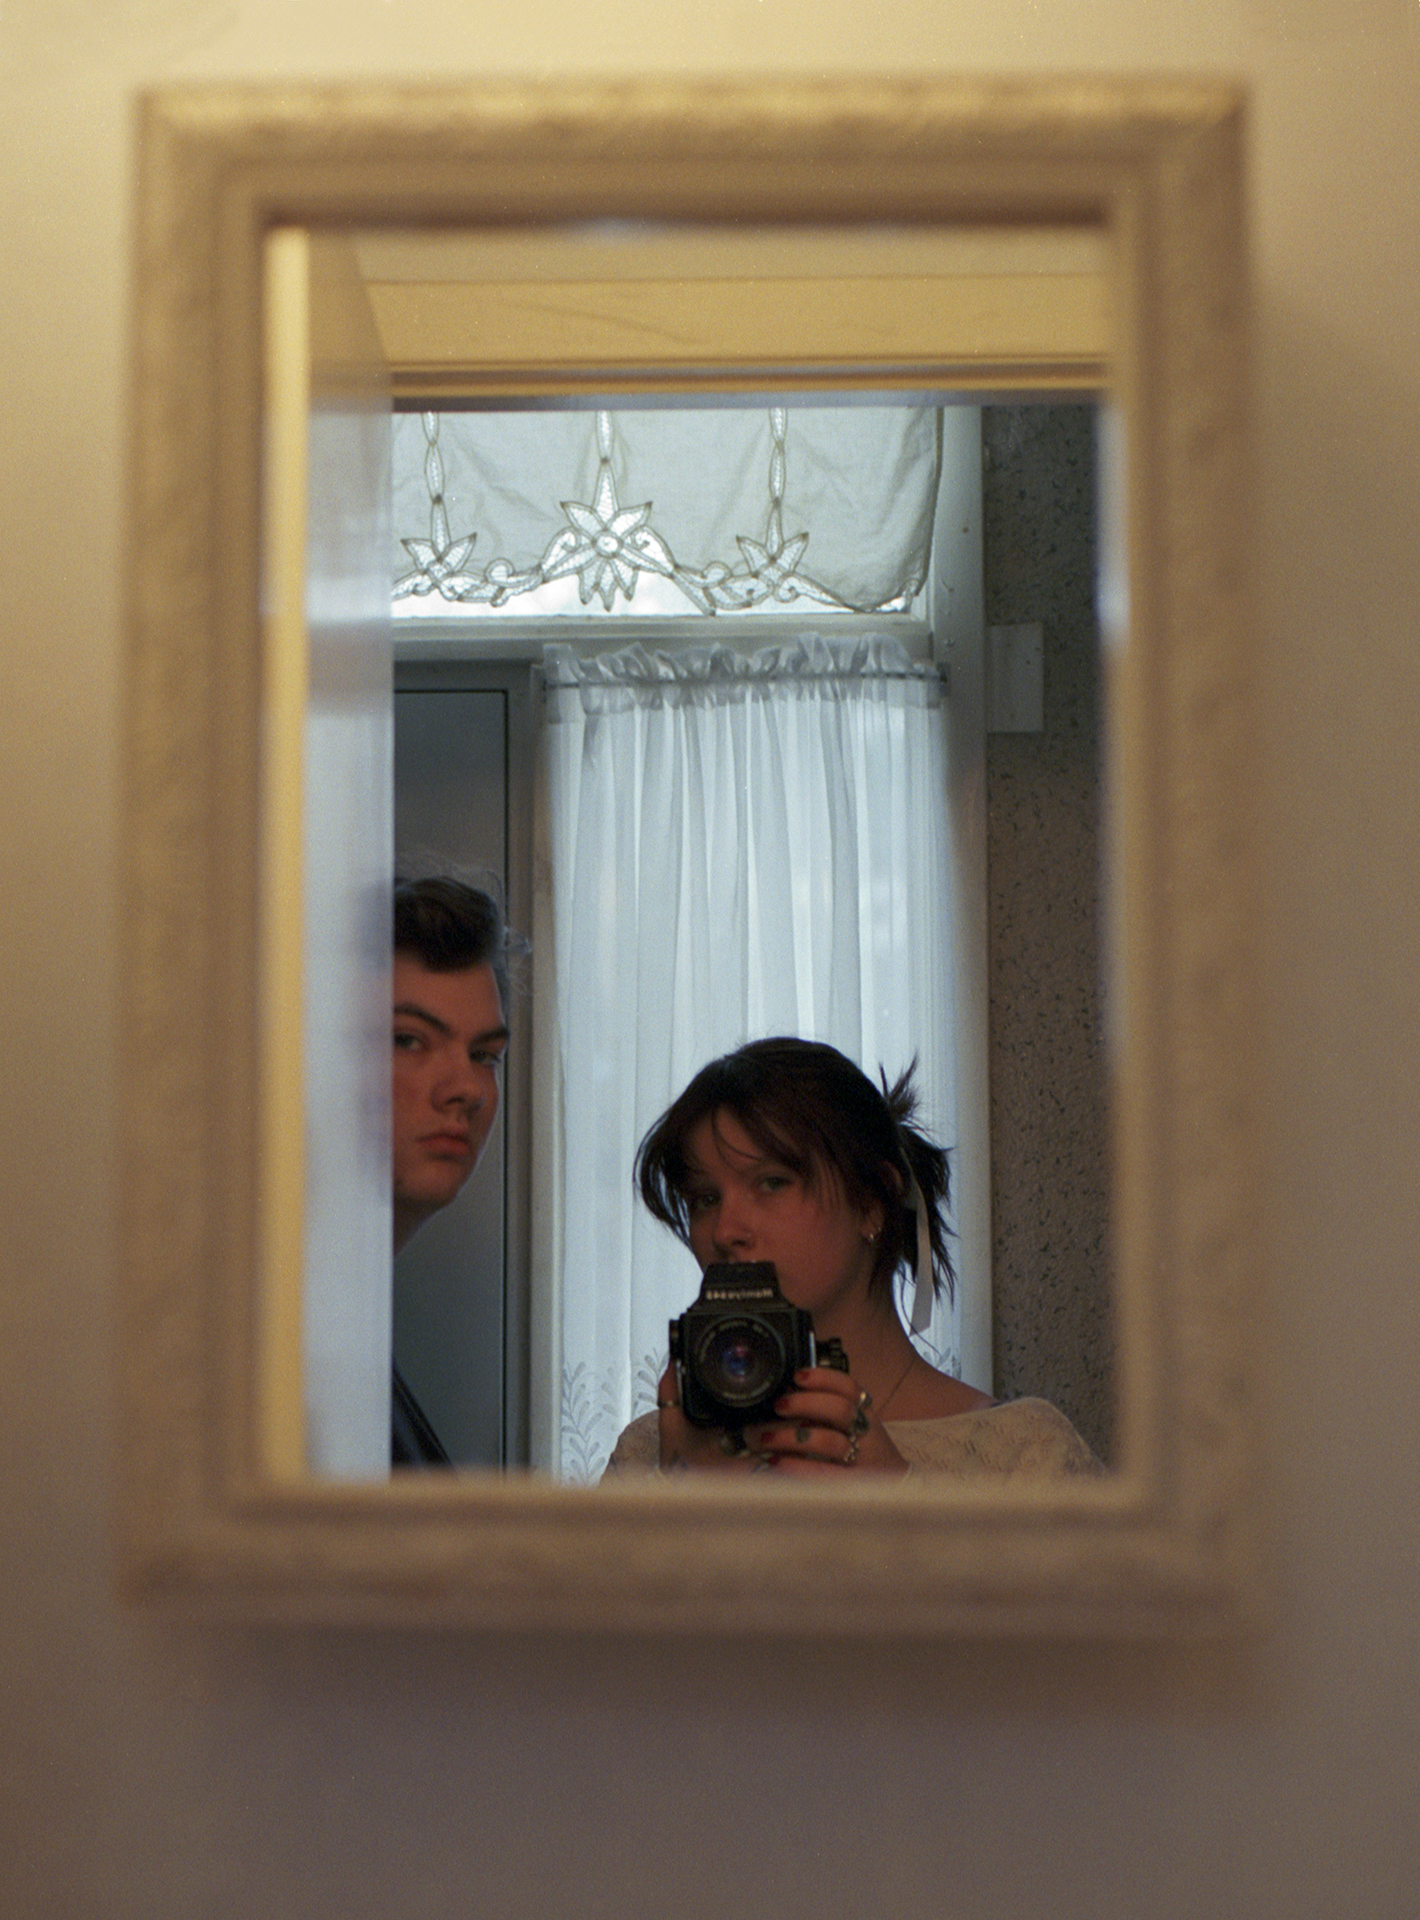 A brother and sister in a reflection of a mirror, they both confront the camera, but the brother is almost out of frame.